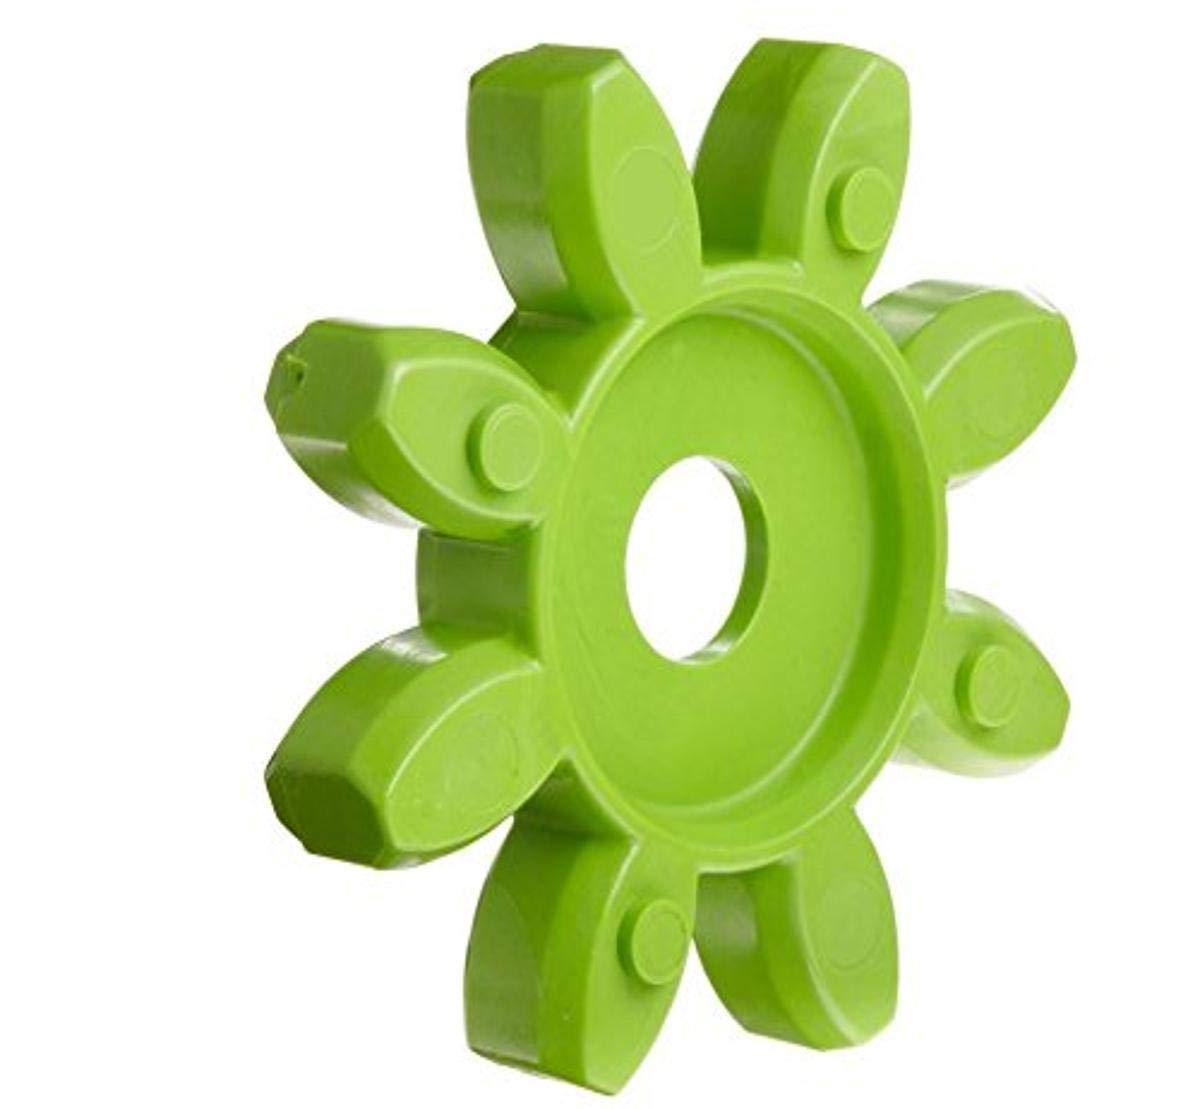 Jaw Coupling Spider and Element, Urethane, Closed Center, Curved Jaw